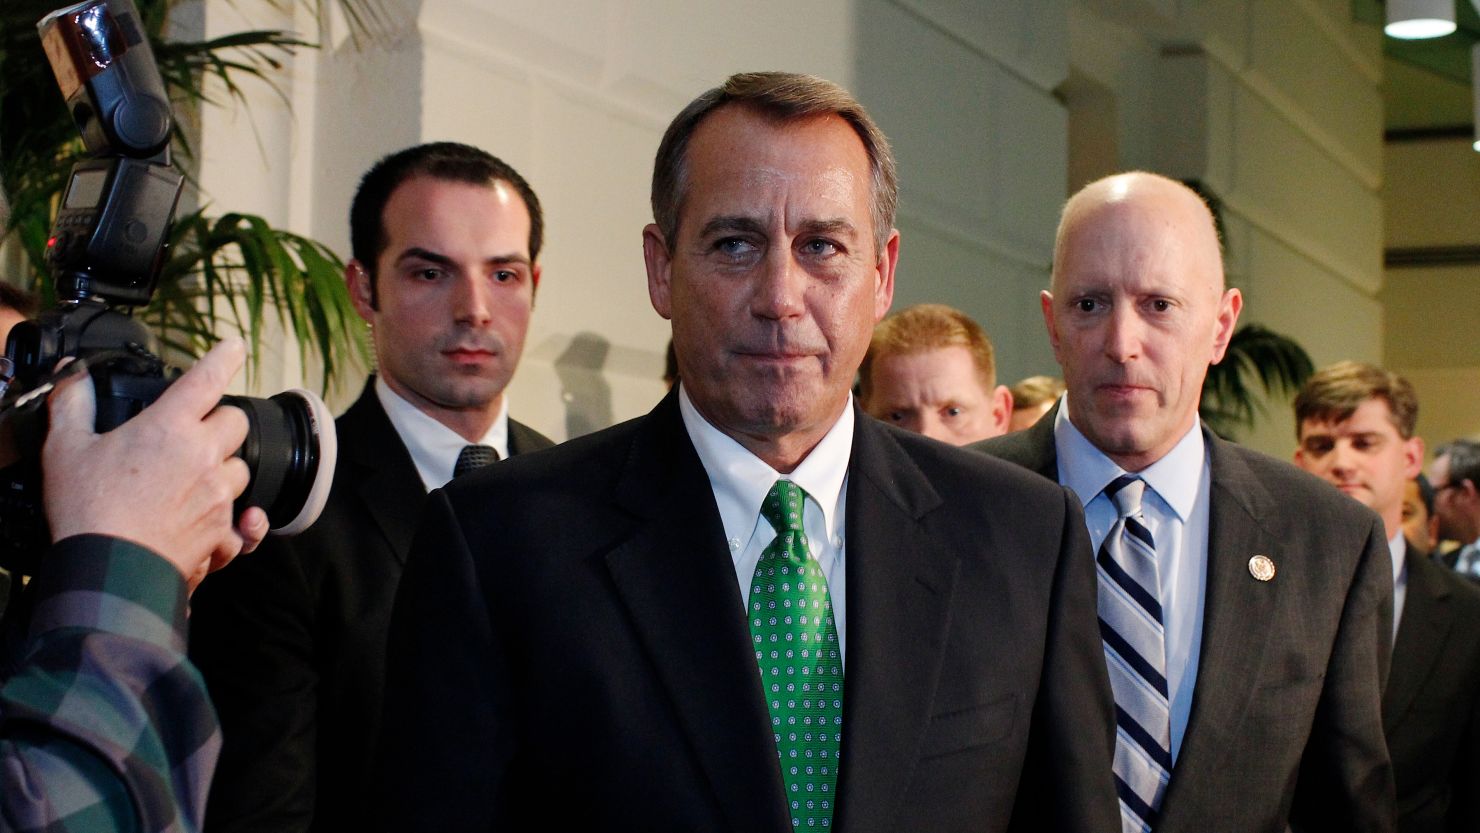 House Speaker John Boehner walks out after a second meeting with House Republicans January 1 over the fiscal cliff deal.
